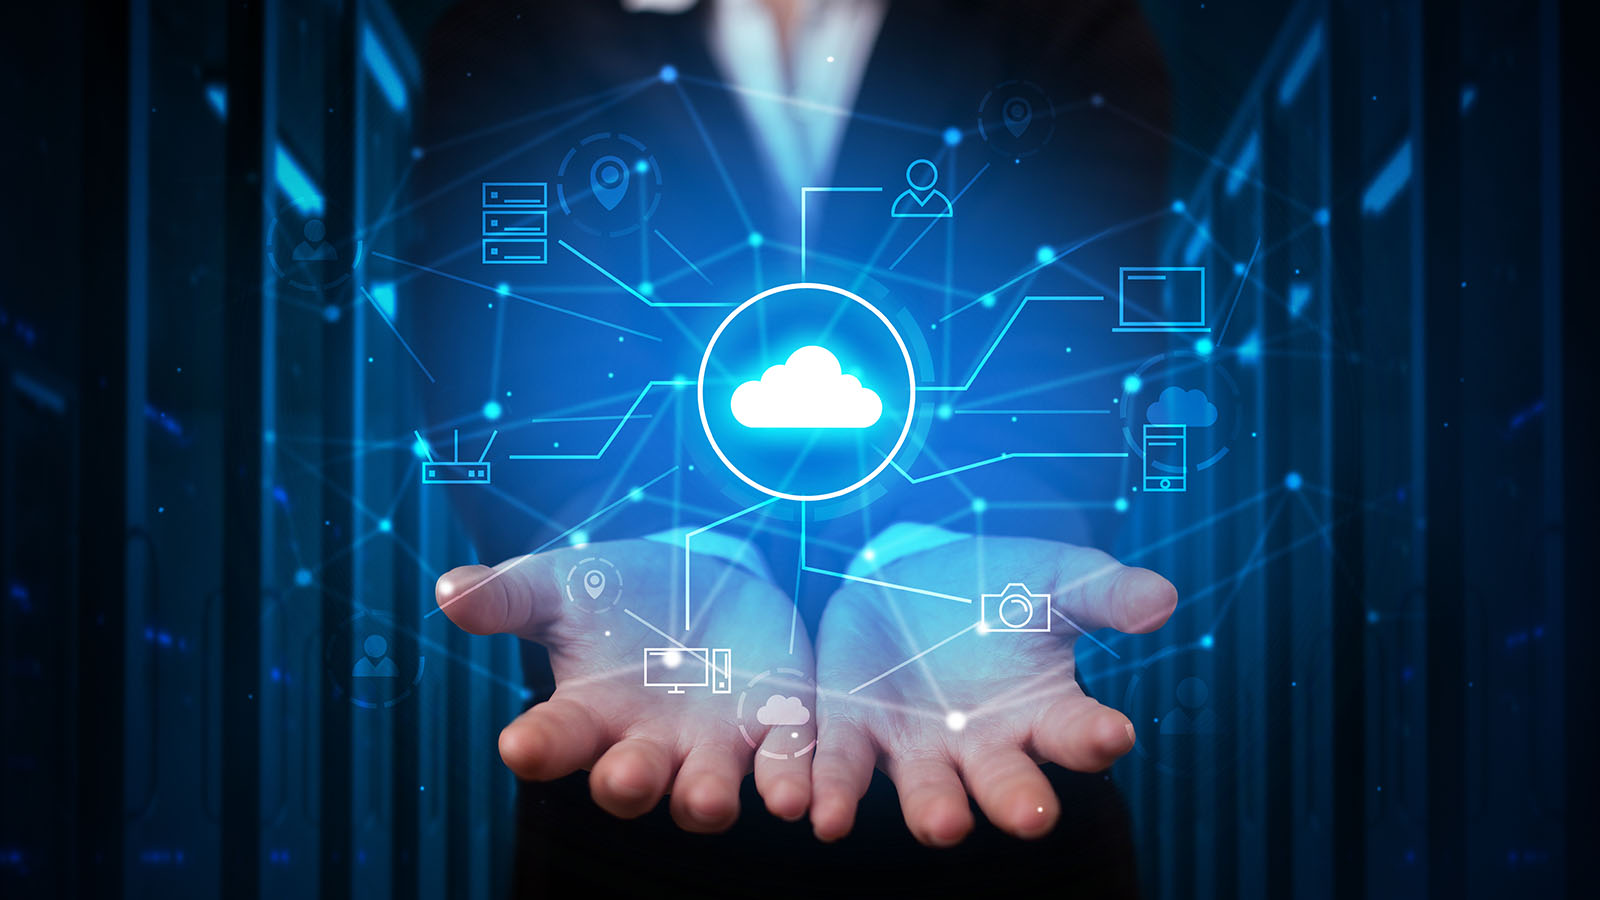 Innovative Cloud Solutions